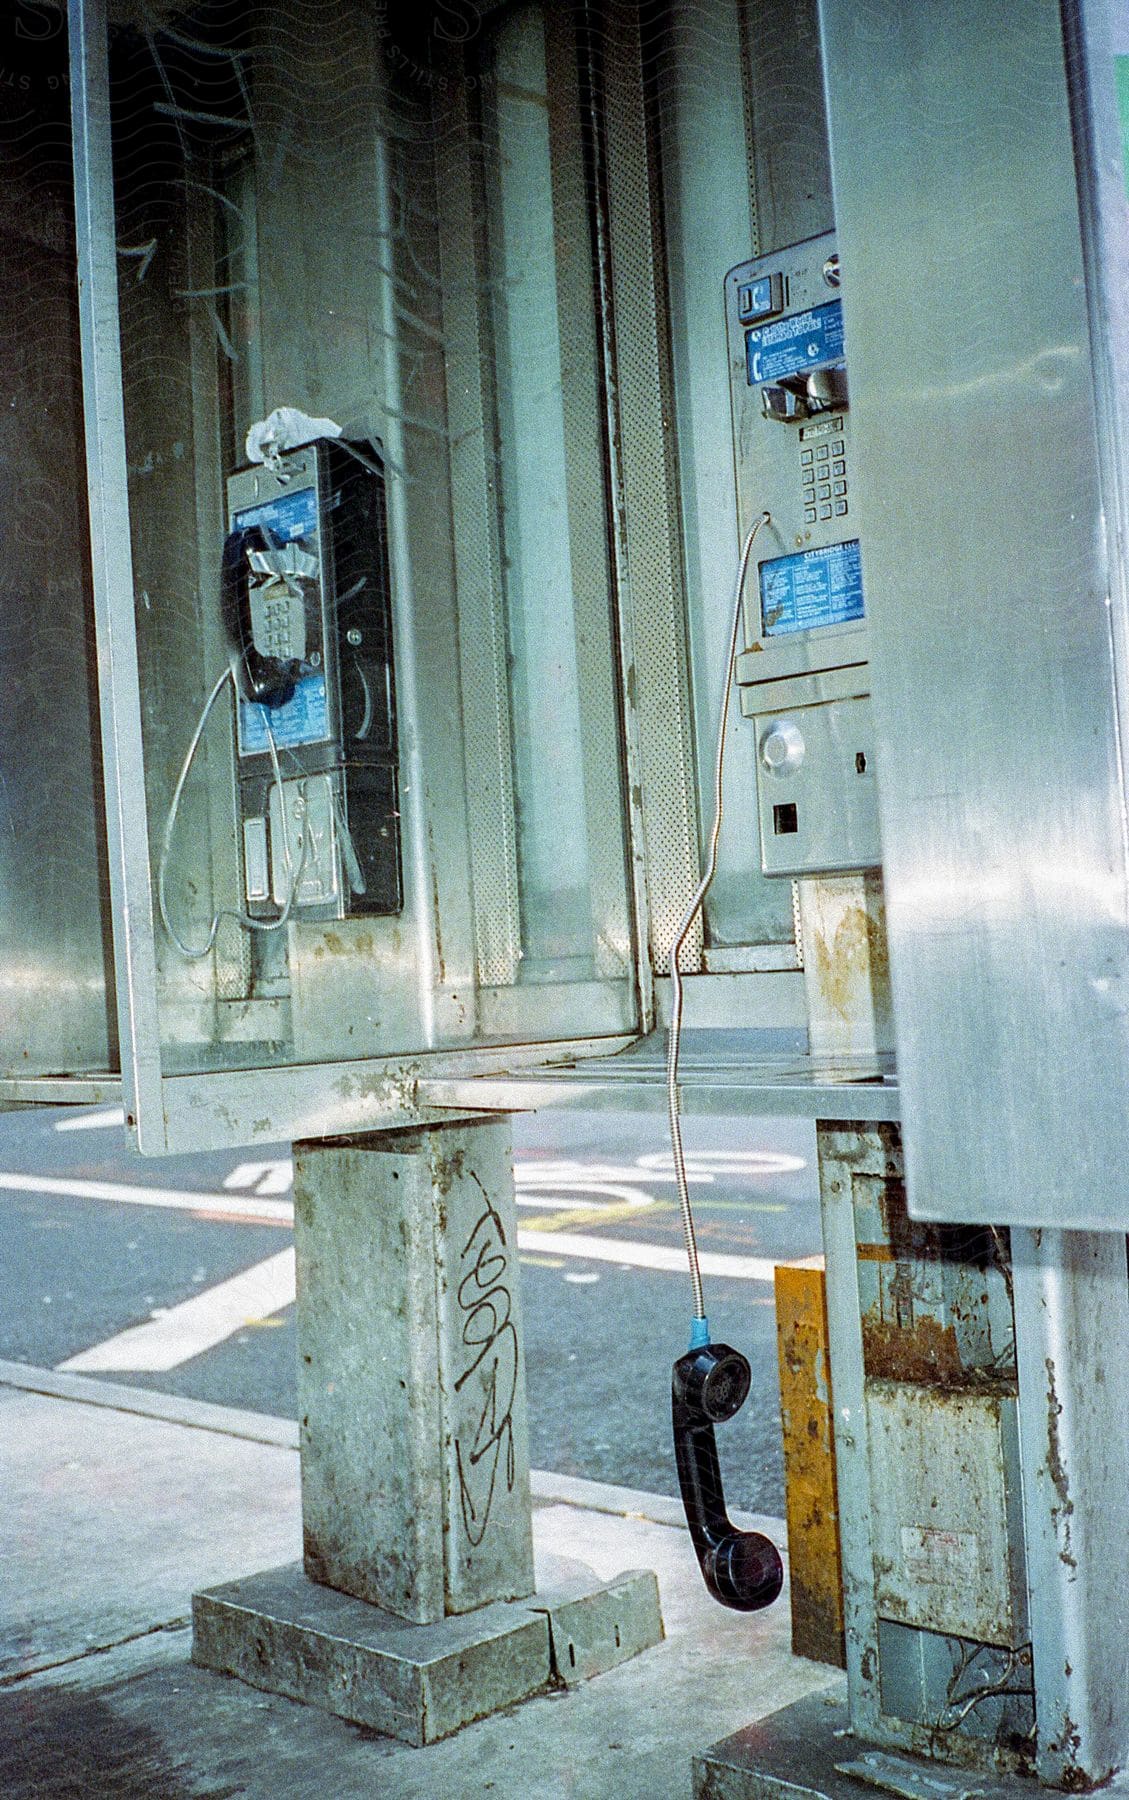 Two pay phones are shown one with its phone hanging